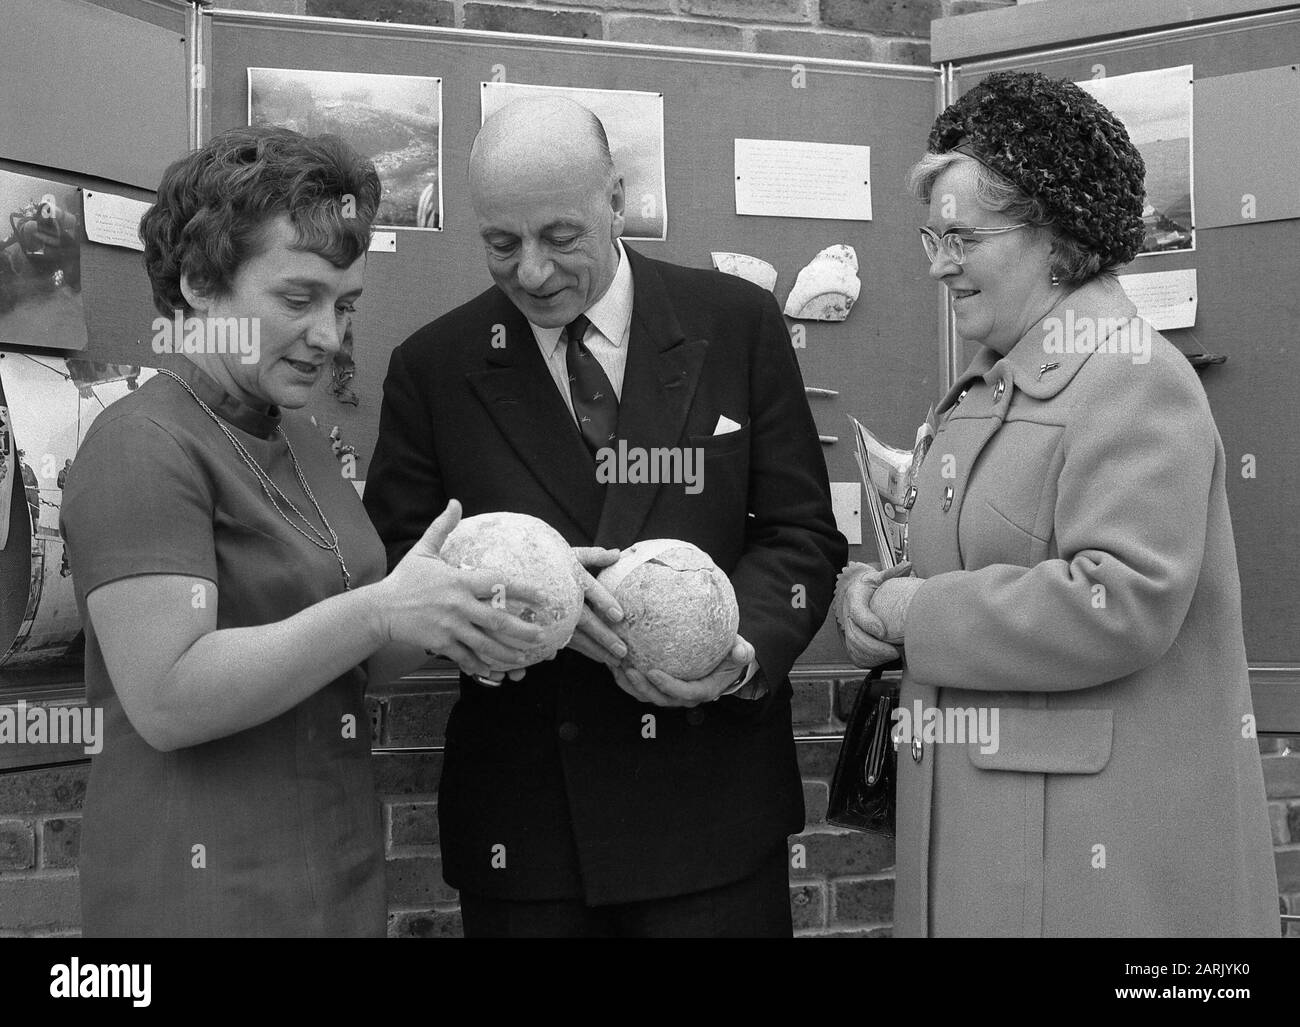 AJAXNETPHOTO. 17TH NOVEMBER, 1971. FISHBOURNE, ENGLAND. - RULE AND ROSE INSPECT BALLS. - SIR ALEC ROSE WHO SAILED AROUND THE WORLD SINGLE HANDED IN 1967-8 IN A 36FT KETCH CALLED LIVELY LADY (CENTRE) WITH HIS WIFE LADY ROSE (RIGHT) AND TUDOR SHIPWRECK MARY ROSE ACHAEOLOGIST AND RECOVERY PROJECT LEADER MARGARET RULE (LEFT) EXAMINE CANNON BALLS RECOVERED FROM THE WRECK SITE AT A PRESS CONFERENCE HELD AT FISHBOURNE'S ROMAN PALACE.  PHOTO:AJAX NEWS & FEATURE SERVICE REF:711117 10 8 Stock Photo